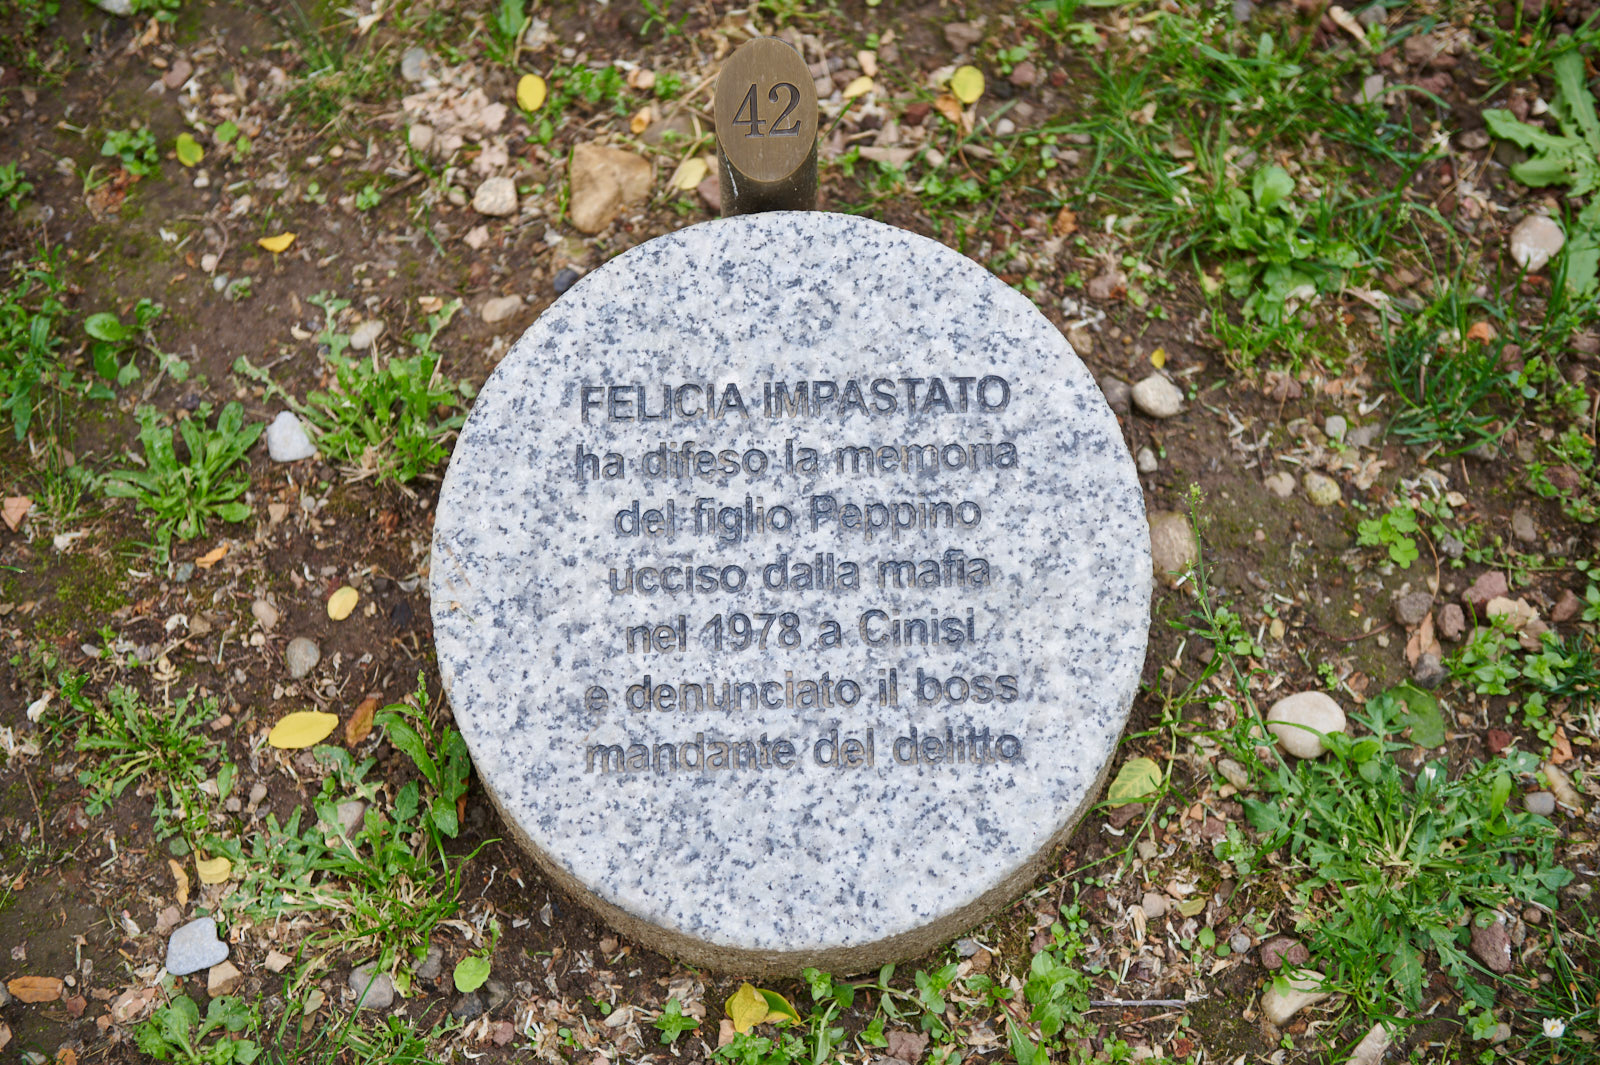 the stone dedicated to Felicia Impastato, mother of Peppino Impastato, at the Garden of the Righteous Worldwide of Milan